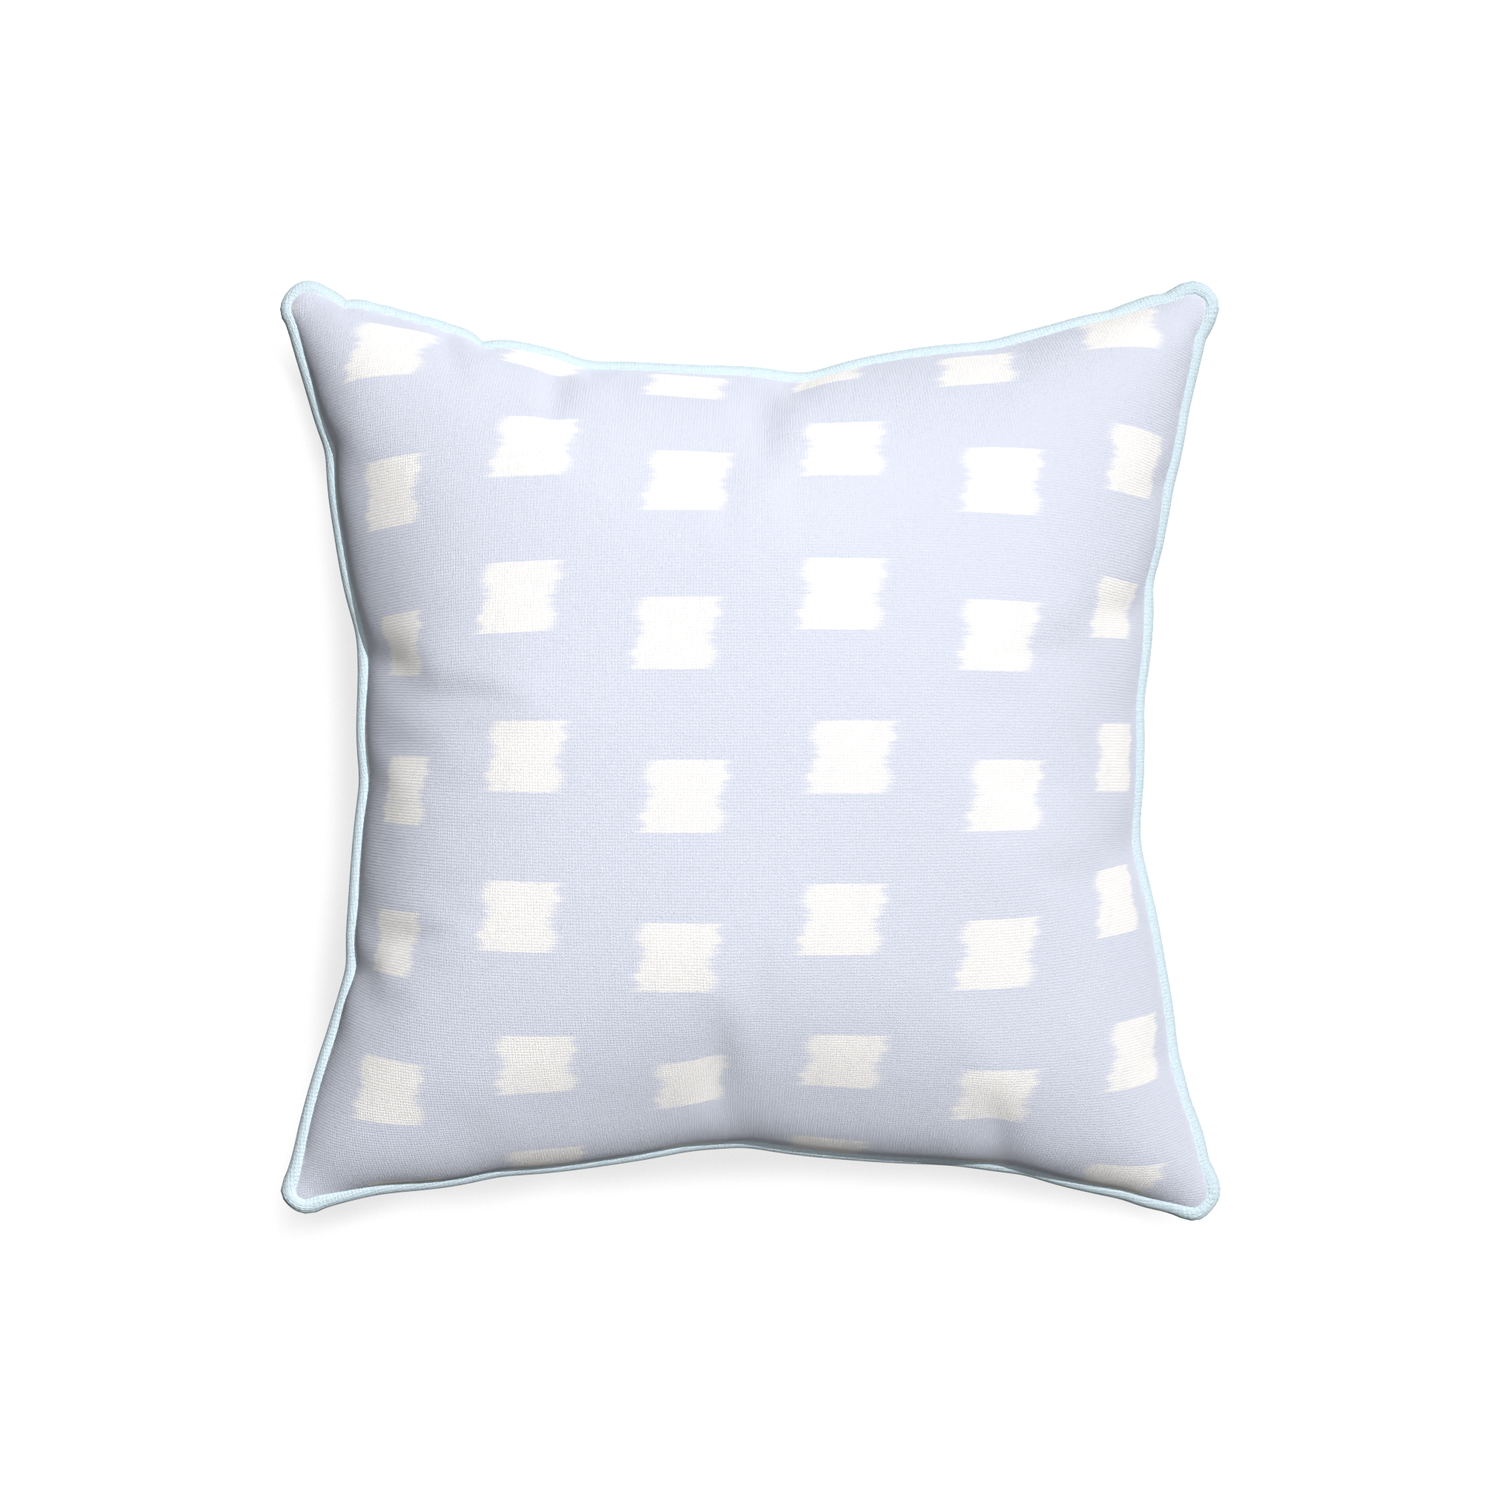 20-square denton custom sky blue patternpillow with powder piping on white background